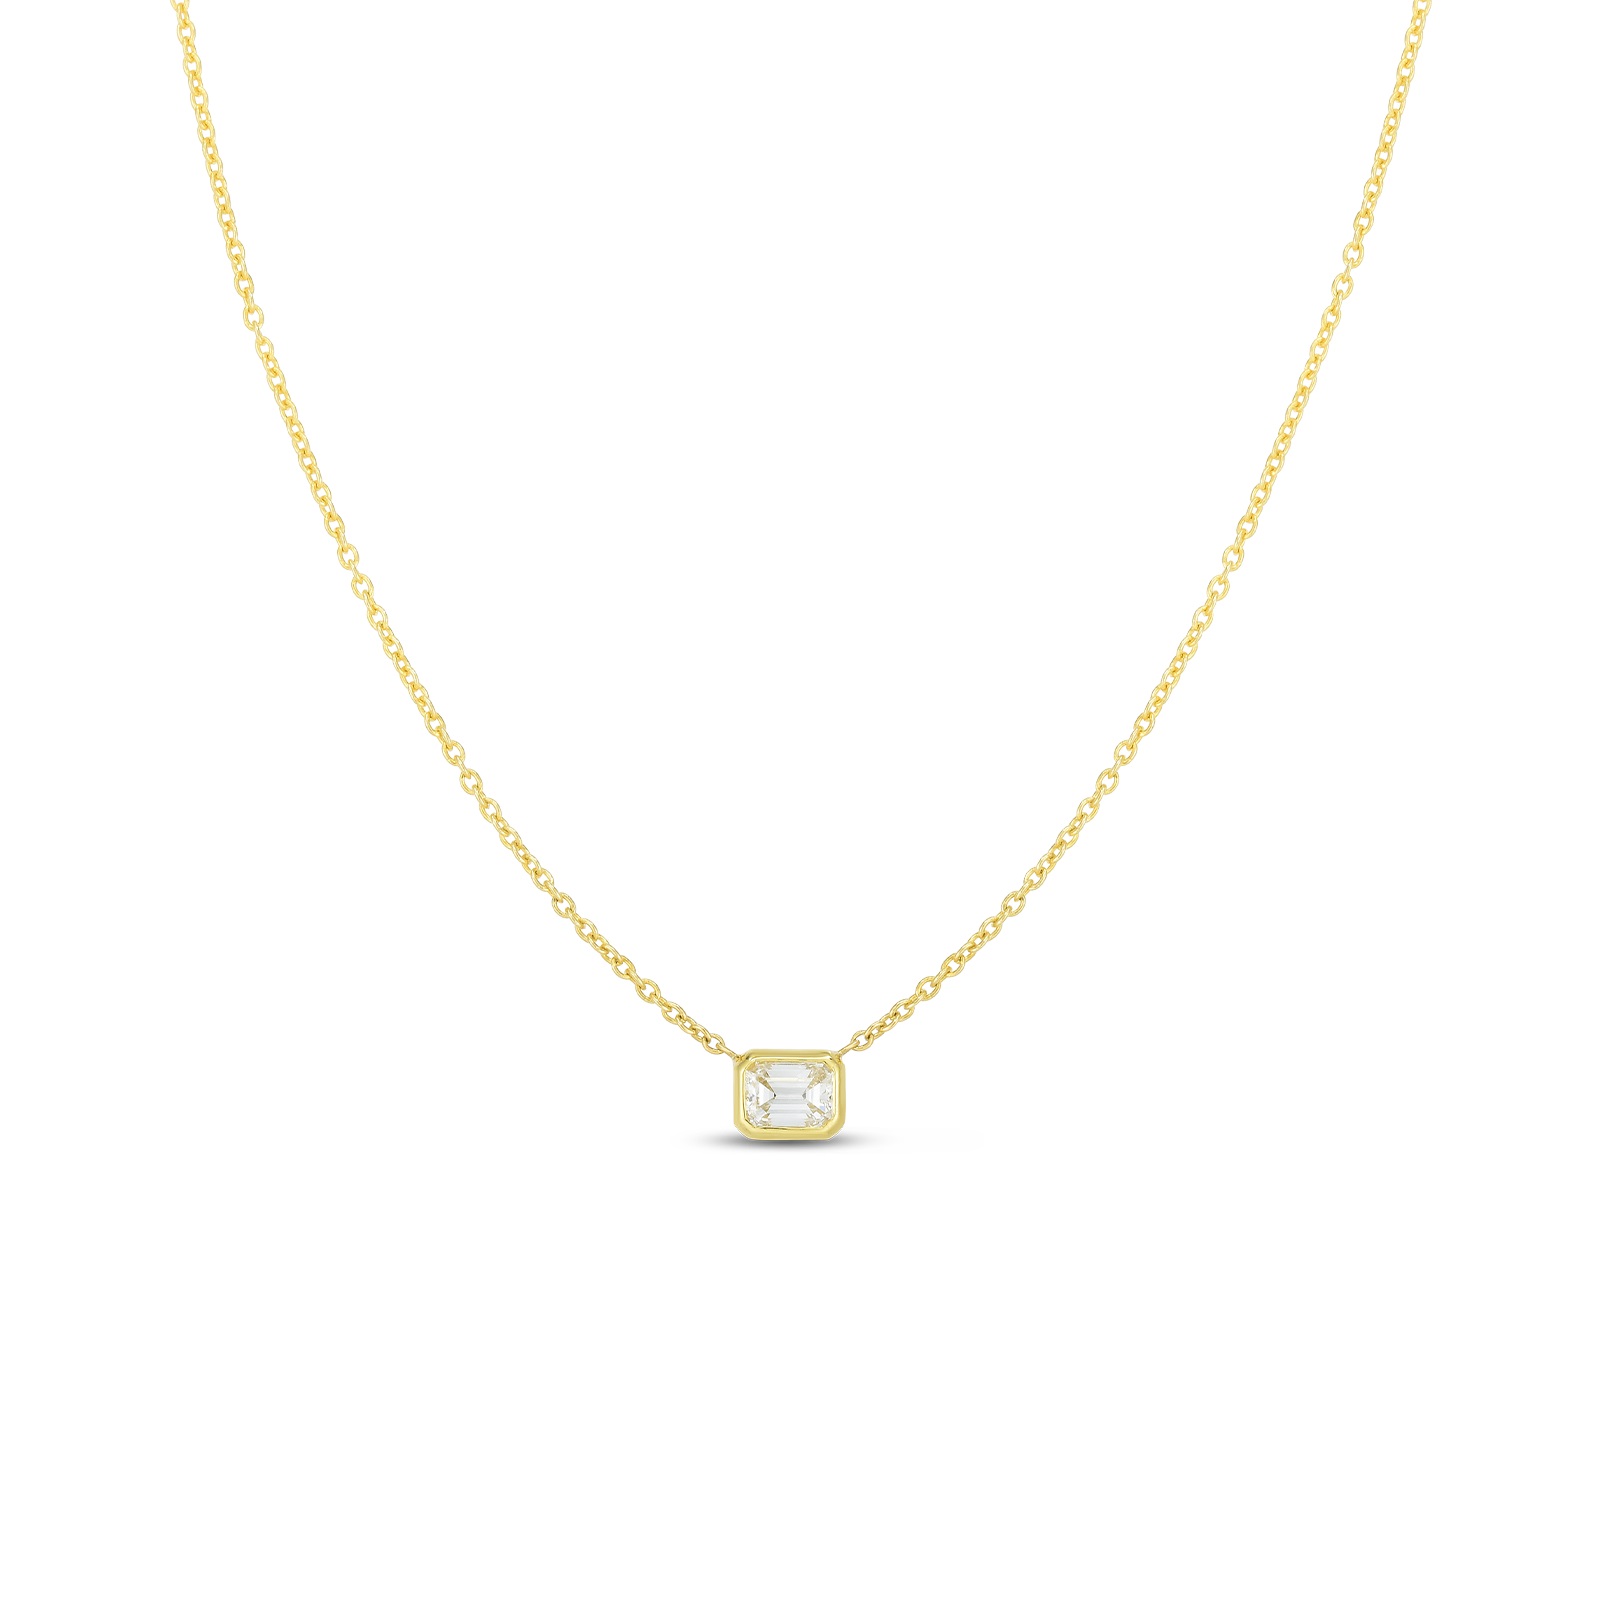 Pave Longhorn 14k Yellow Gold Charm in White Diamond